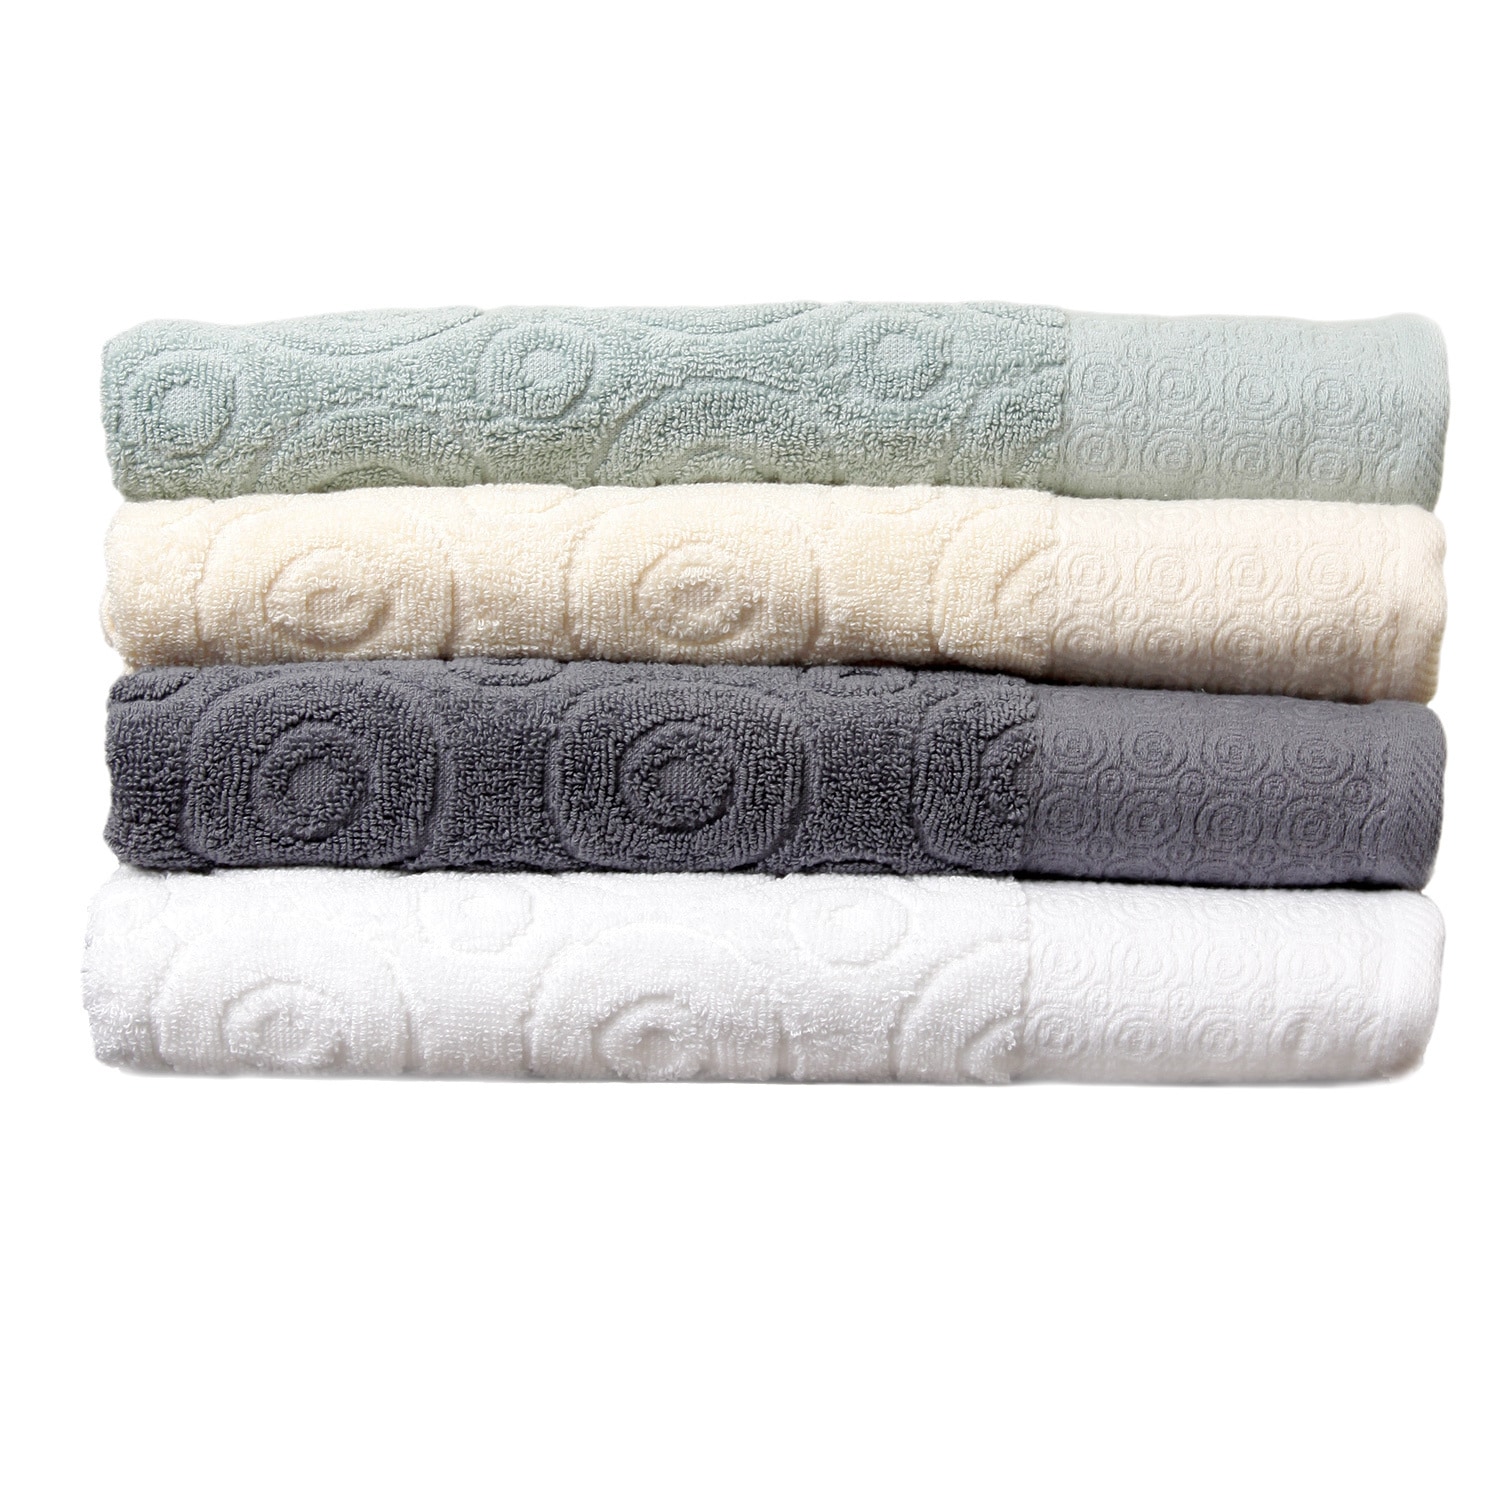 Jacquard Terry Towel Circle Design 6 piecetowel Set (White, Ivory, Grey, AquaJacquard BorderCare Instructions Machine Wash Cold, Gentle Cycle with Like Colors, Only Non Cholorine BleachDimensionsWashcloth 13 L x 13 WHand Towel 26 L x 16 WBath Towel 54